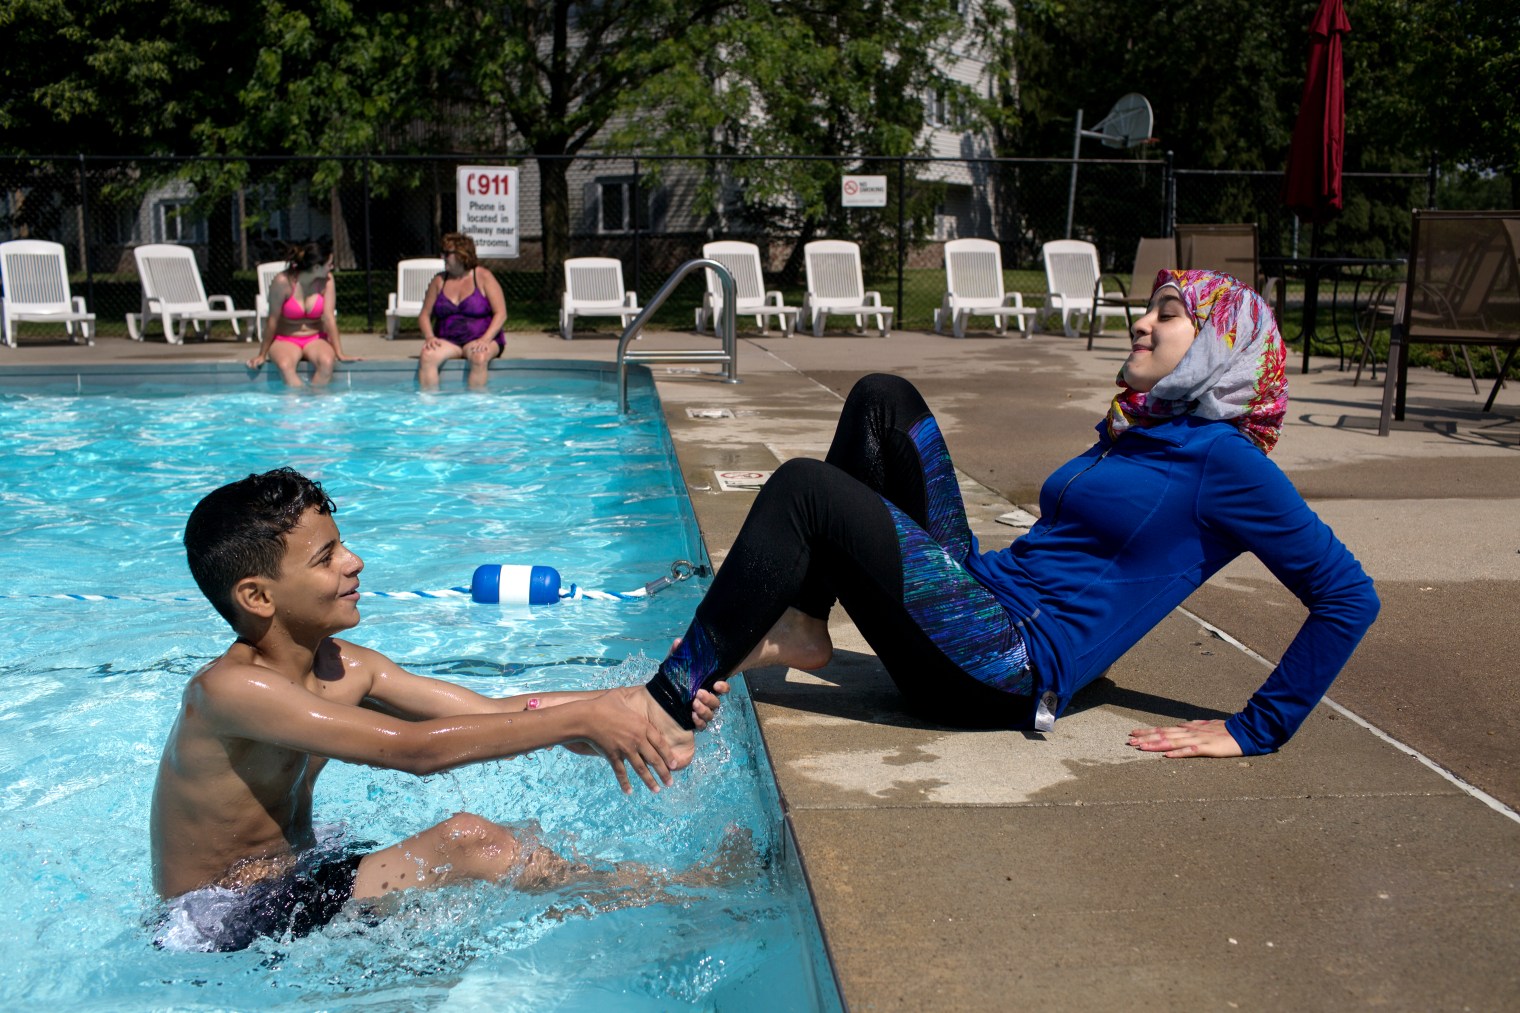 Sedra Tameem pulls away from Taha Albomo Hammed as he tries to pull Sedra into the pool at the Tameem's apartment complex in West Des Moines, Iowa.